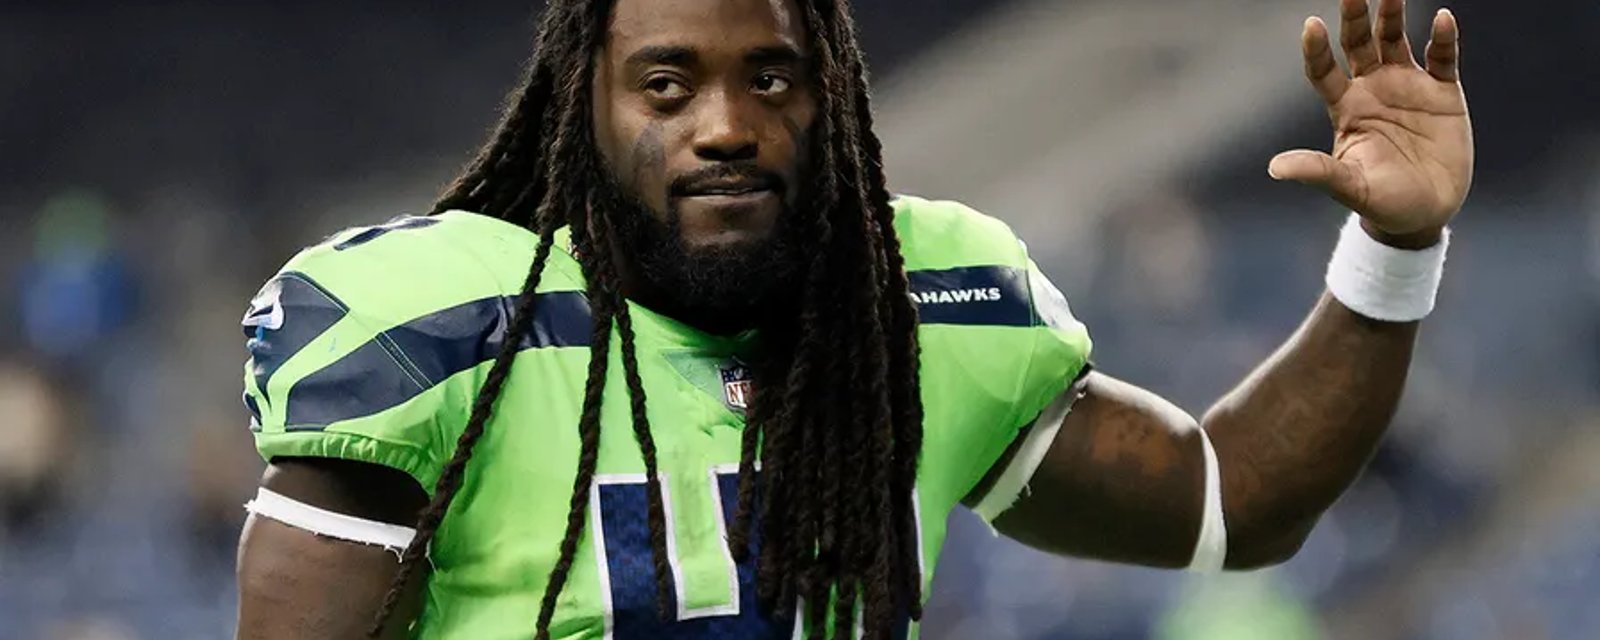 Former Seahawks RB Alex Collins has died at 28 